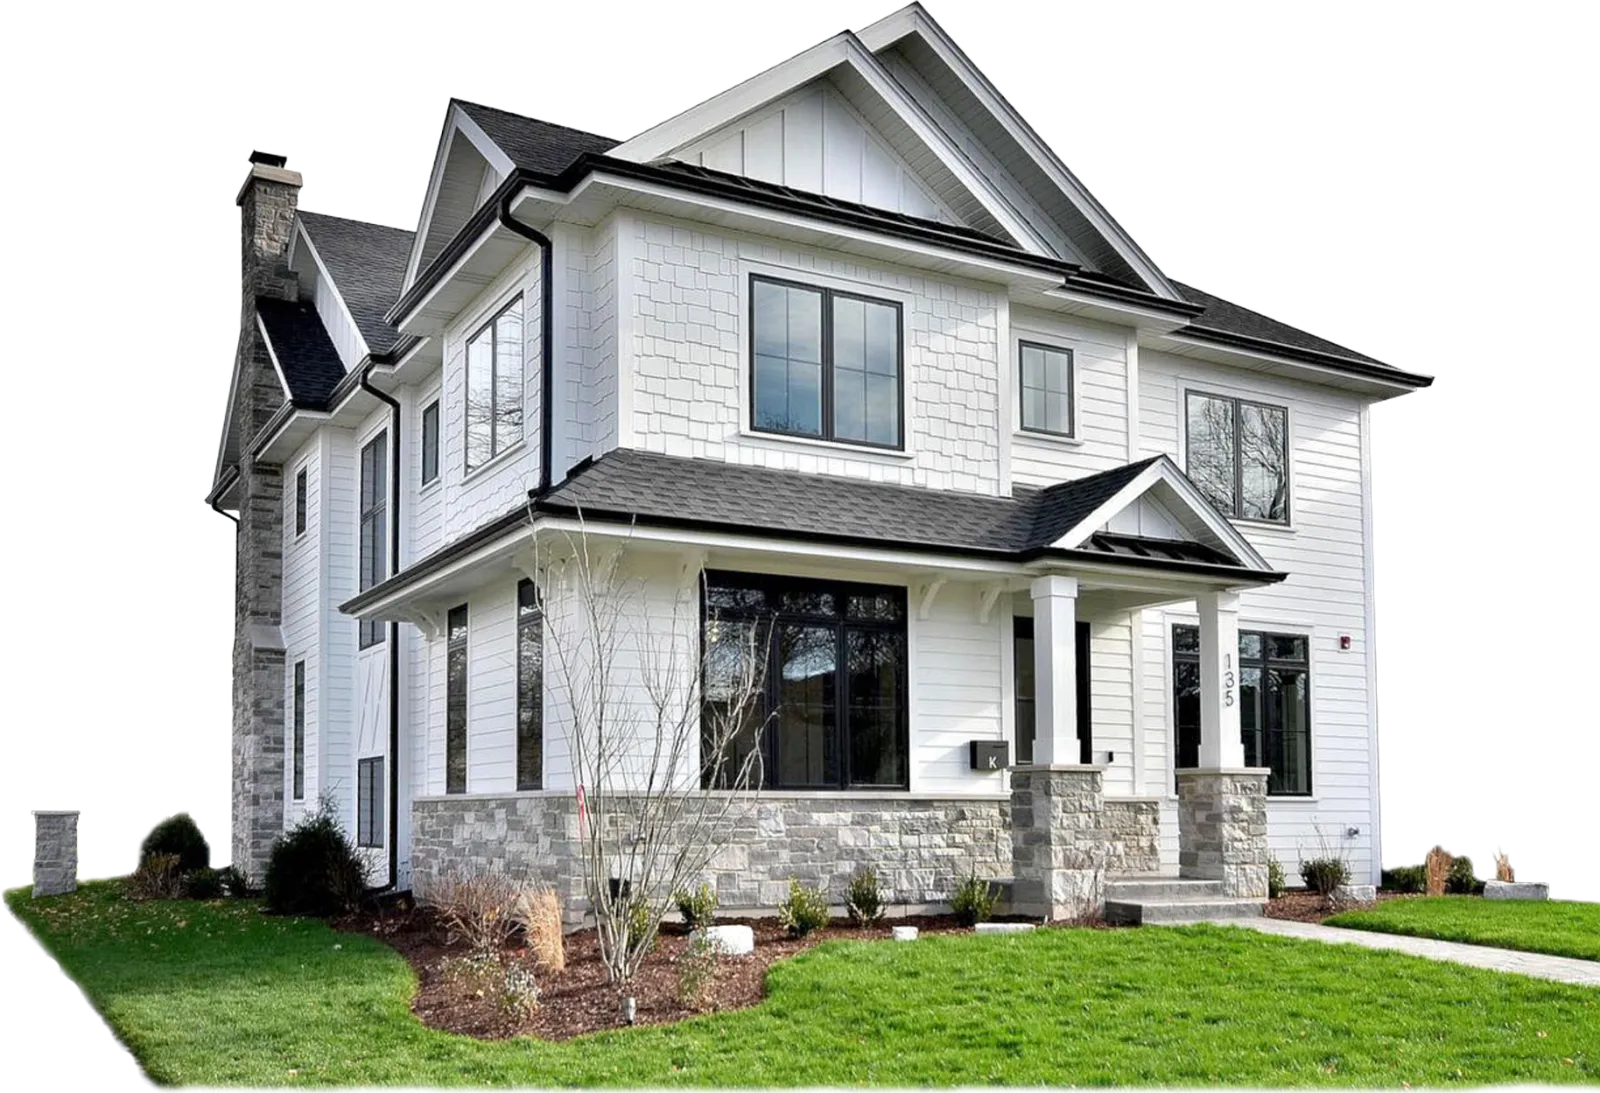 NEW SIDING IMPROVES YOUR HOME'S LOOKS, MAINTENANCE, AND VALUE